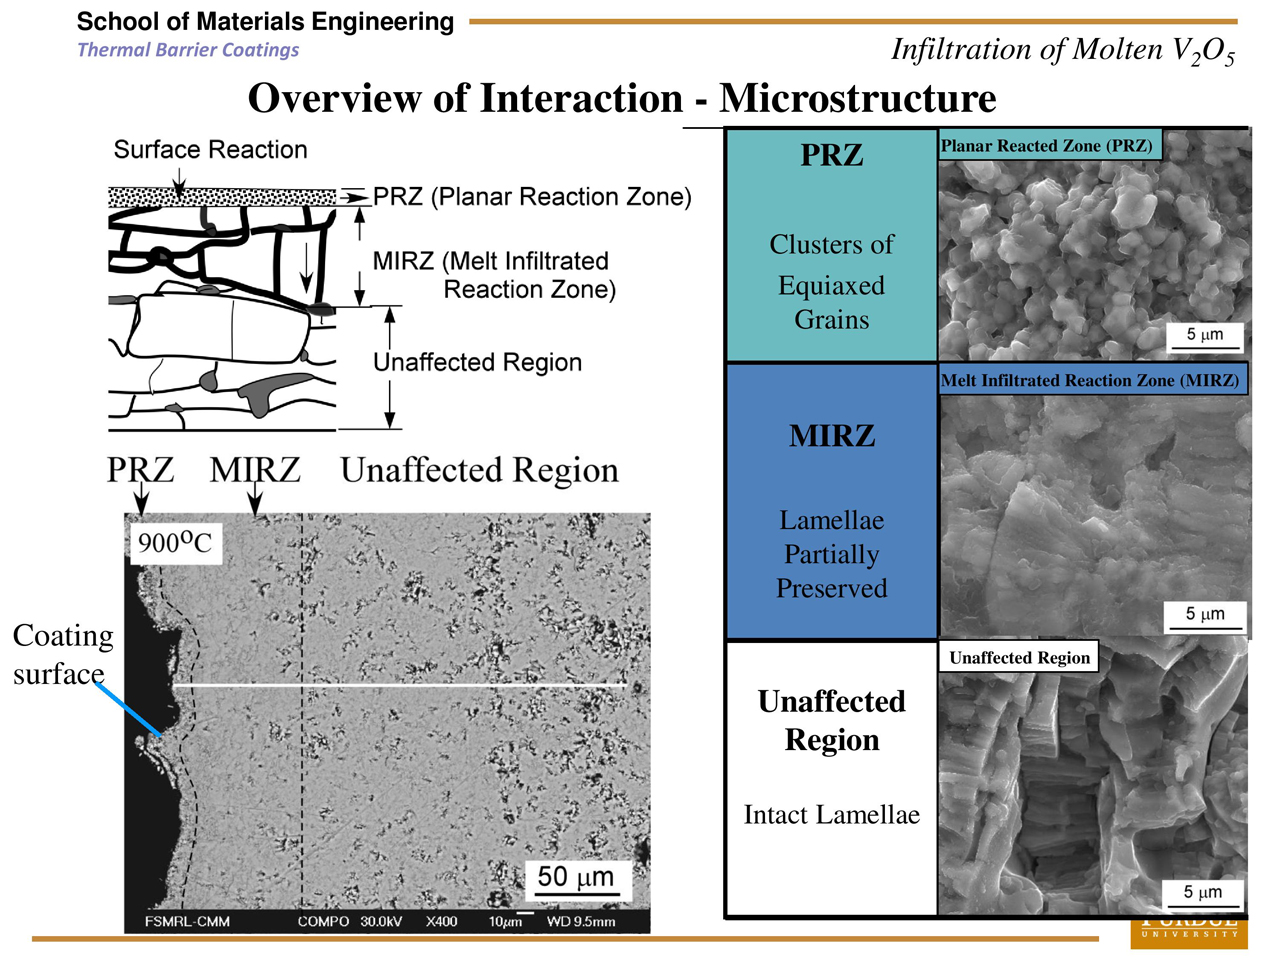 Overview of Interaction - Microstructure